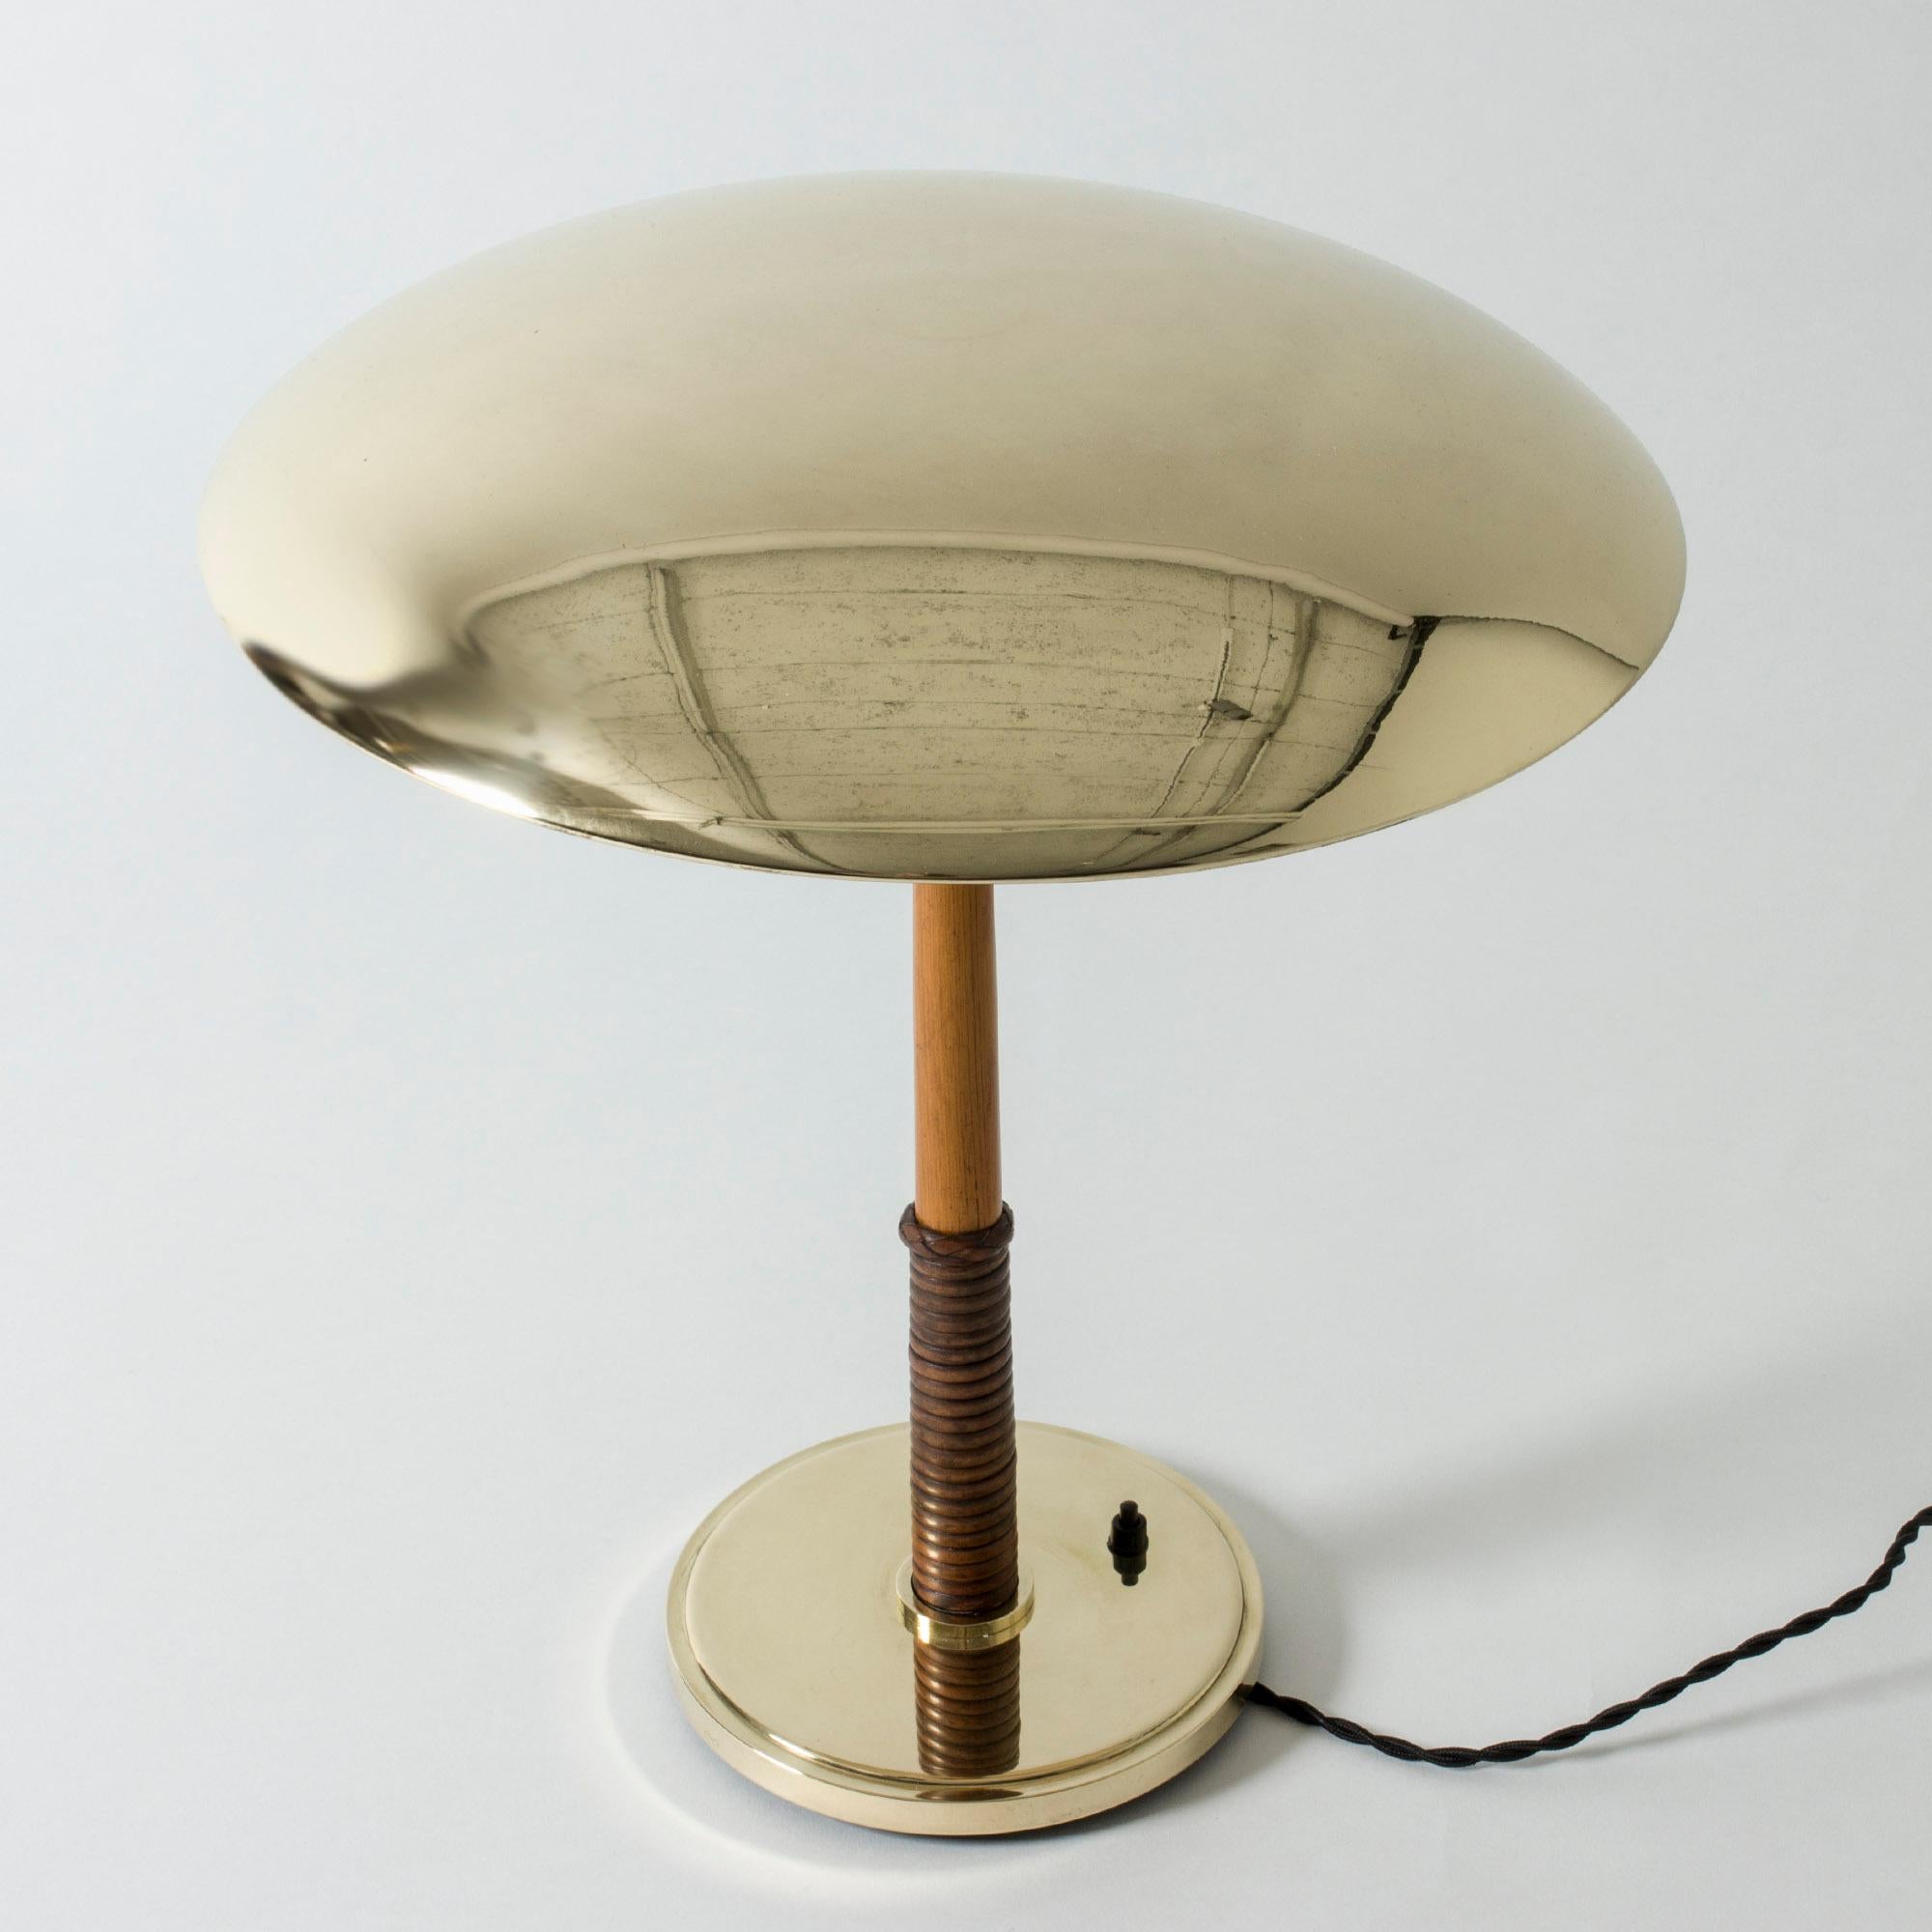 Scandinavian Modern Brass, Mahogany and Leather Table Lamp from Böhlmarks, Sweden, 1940s